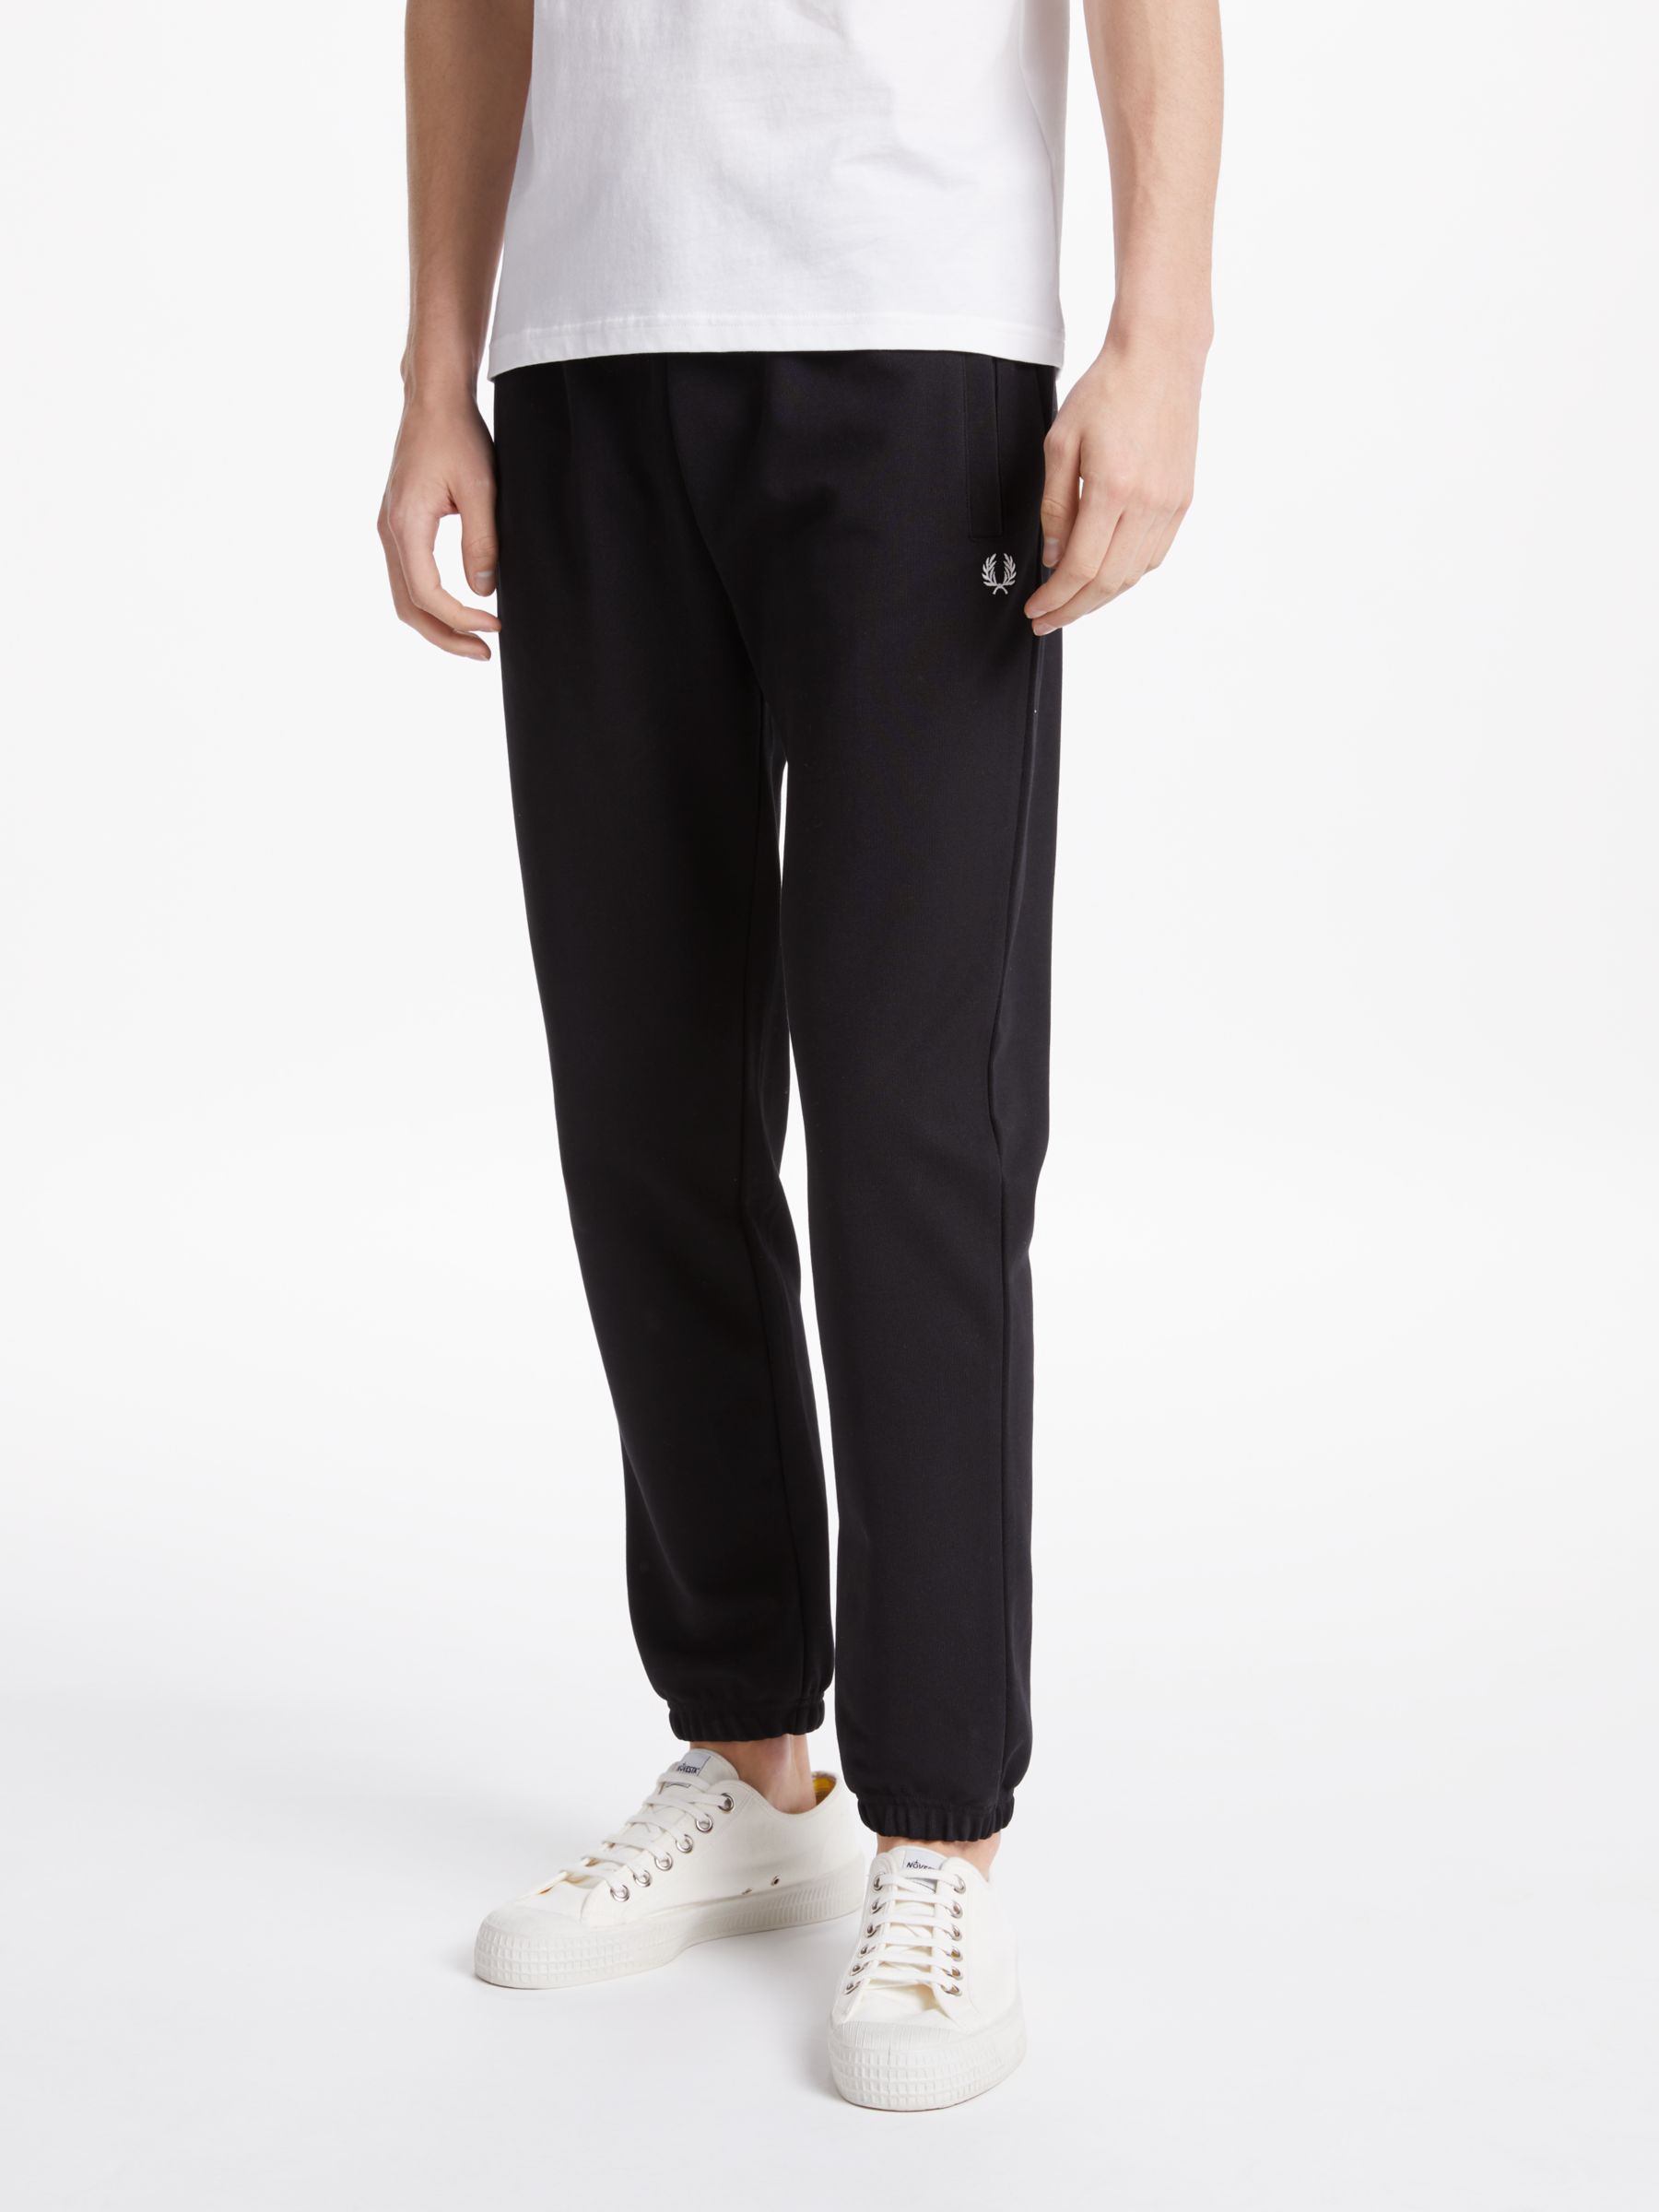 Fred Perry Amplified Reverse Tricot Jogging Bottoms, Black